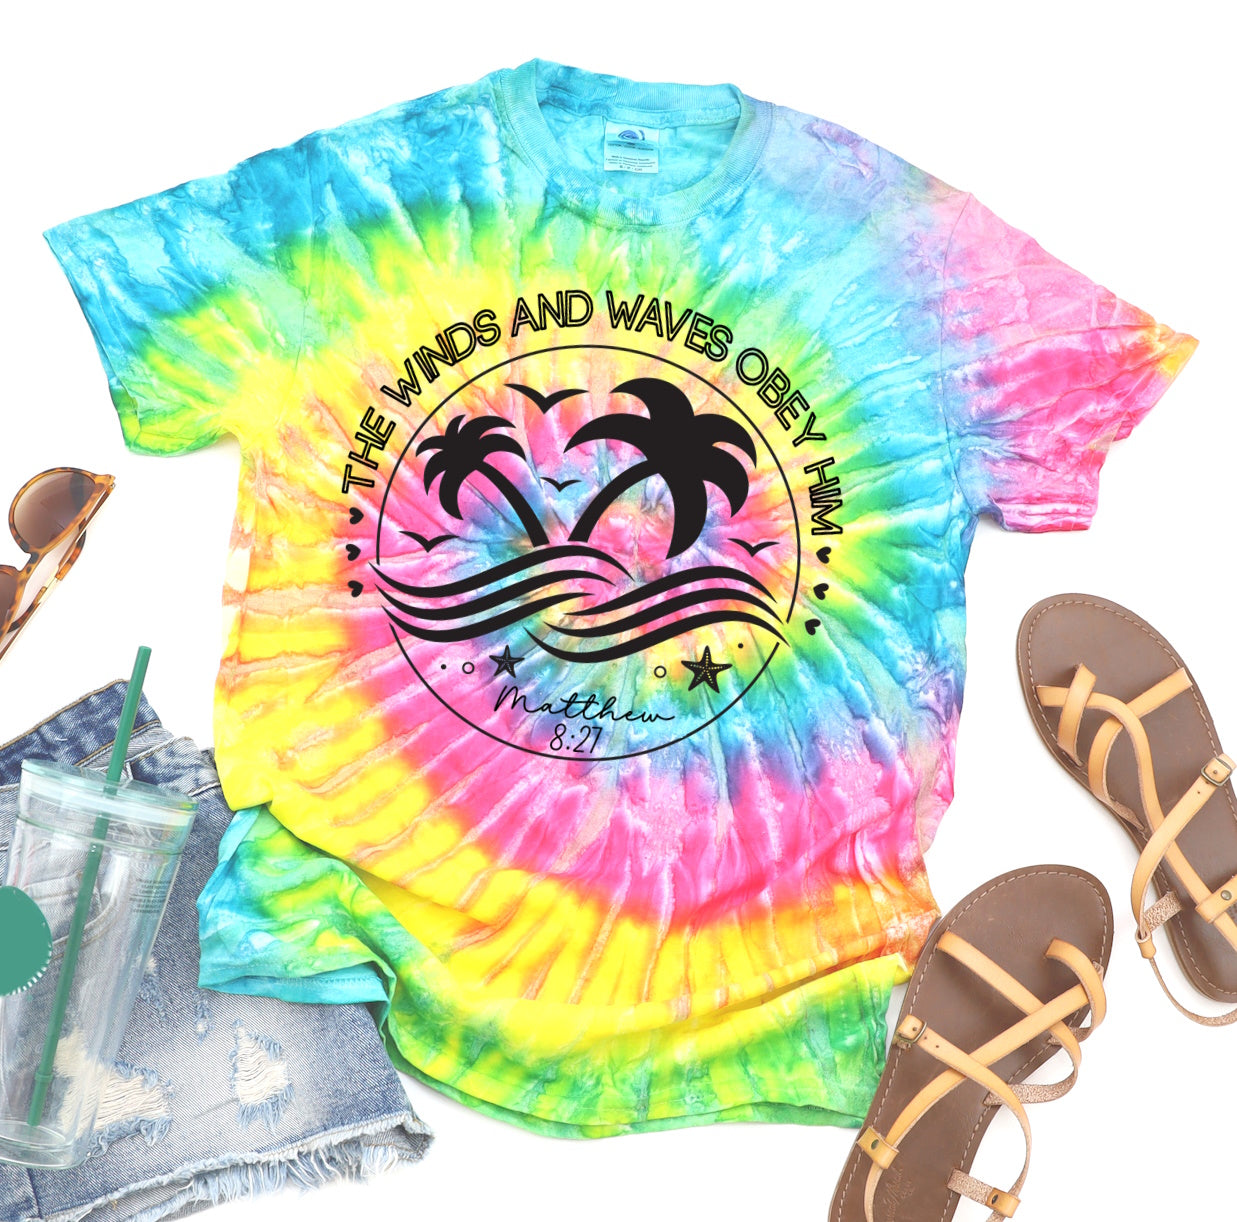 The Wind And Waves Obey Him Tie Dye T-shirt